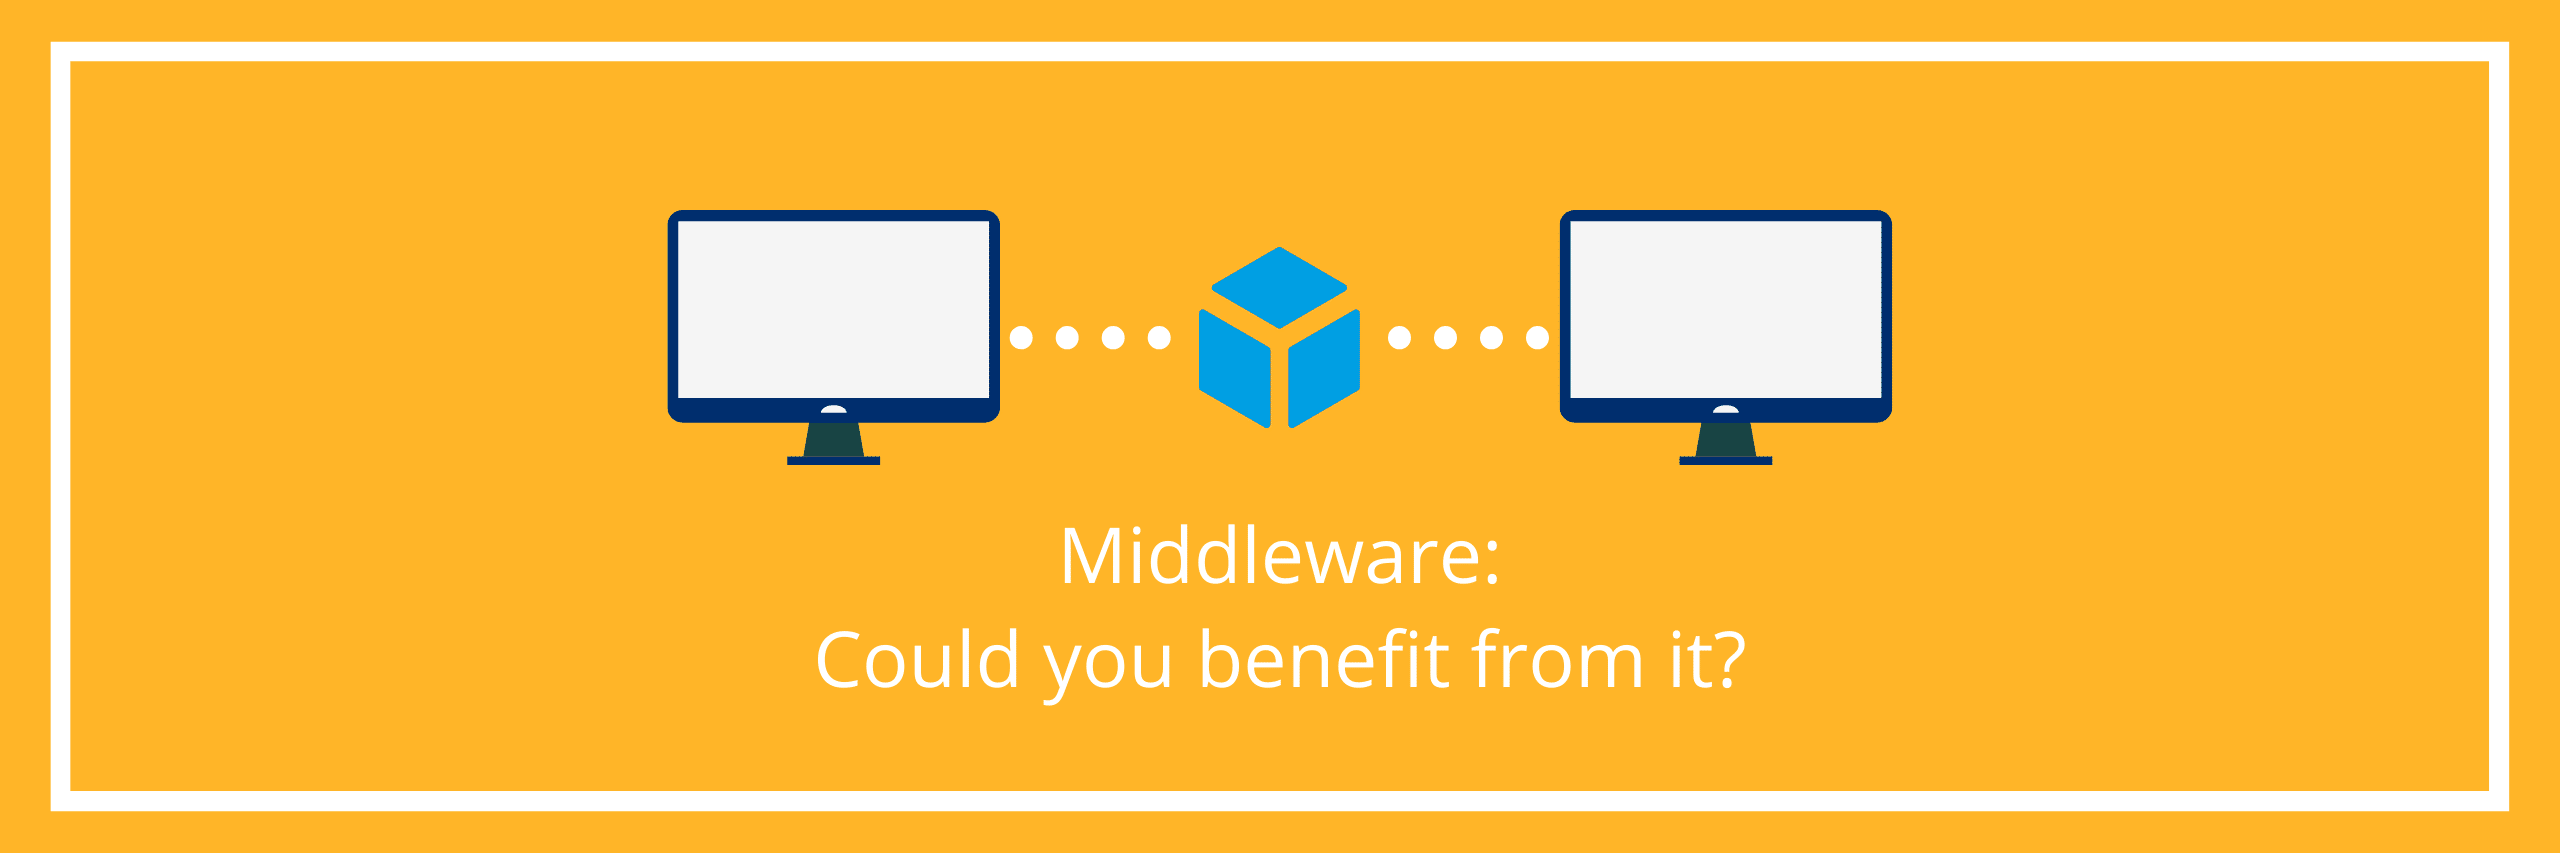 Middleware – could you benefit from it